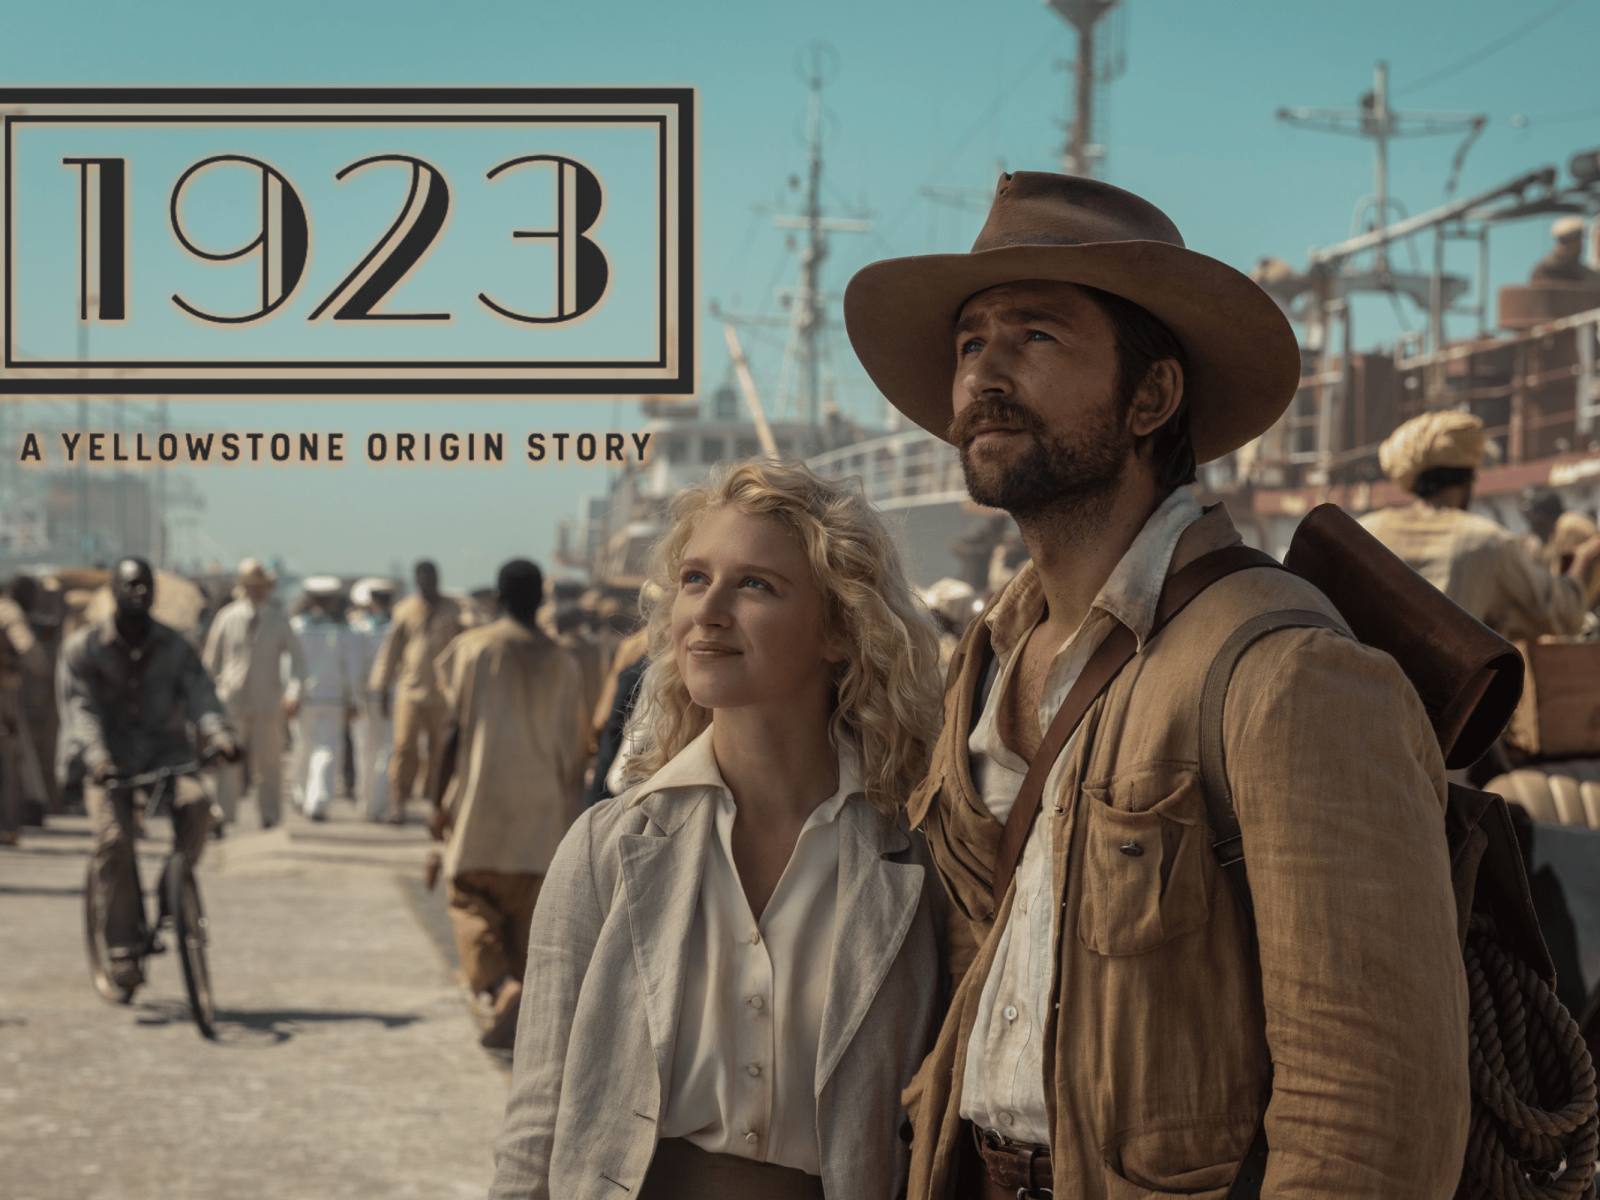 1923' Episode 5 Recap: Another Branch Added to the Dutton Family Tree